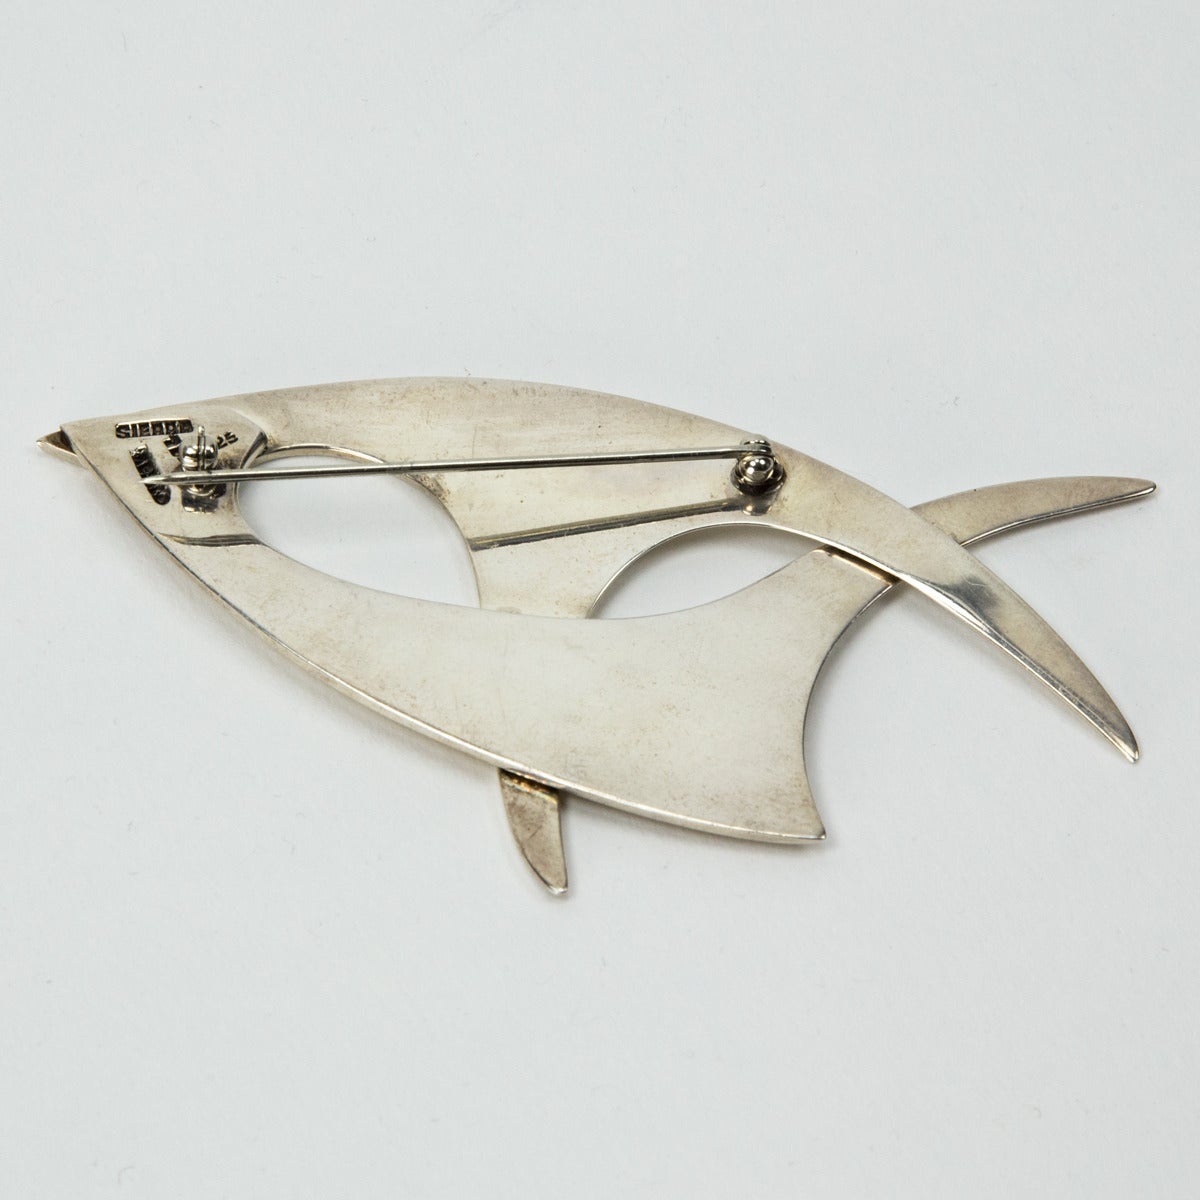 A Striking Iconic Modernist Abstract Fish pin by the famous Sierra Mexico Silversmiths. Beautifully crafted in sterling silver; measuring approx 4” x 2”. Fully hallmarked: MEXICO SIERRA 925 TD C1960s. Add a little flair to any outfit!